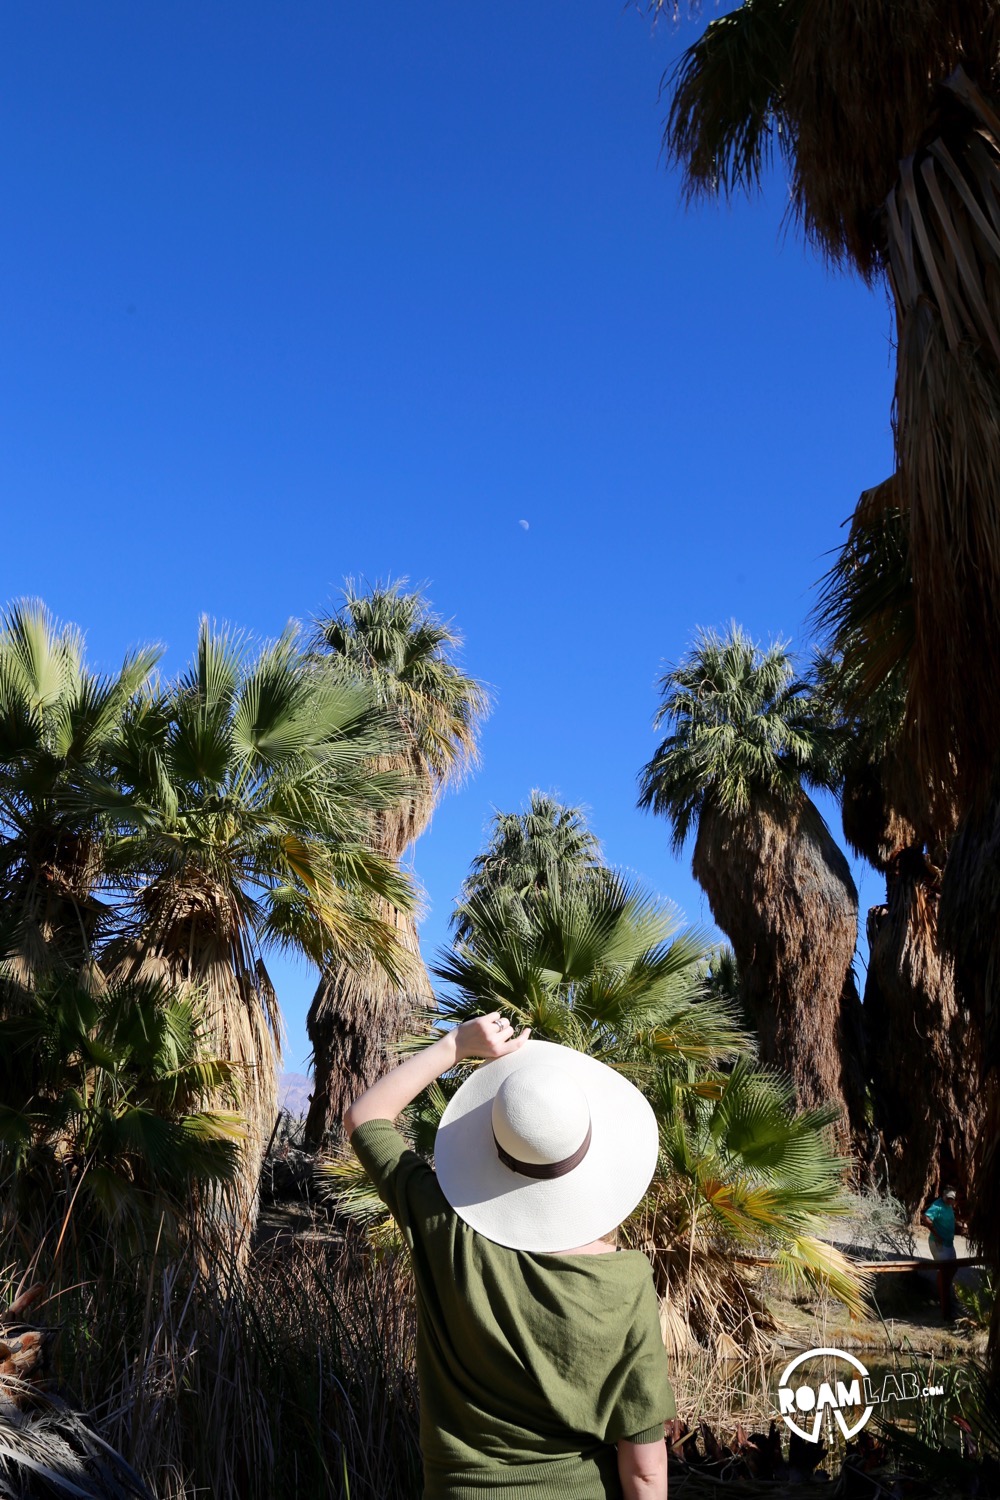 In the middle of the California desert is the Thousand Palms Oasis.